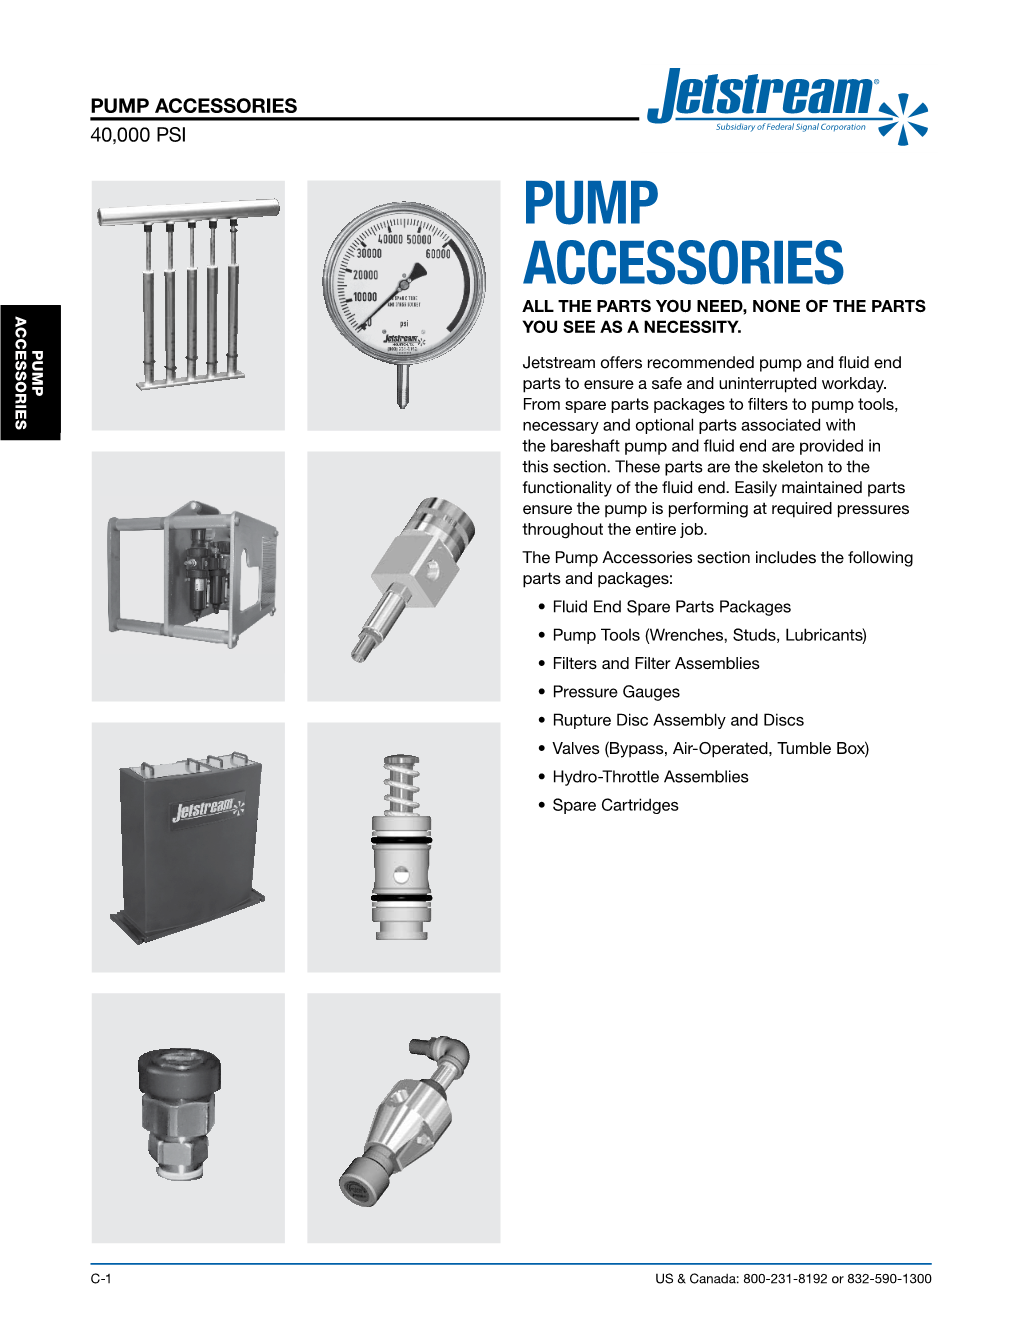 Pump Accessories All the Parts You Need, None of the Parts Accessories You See As a Necessity